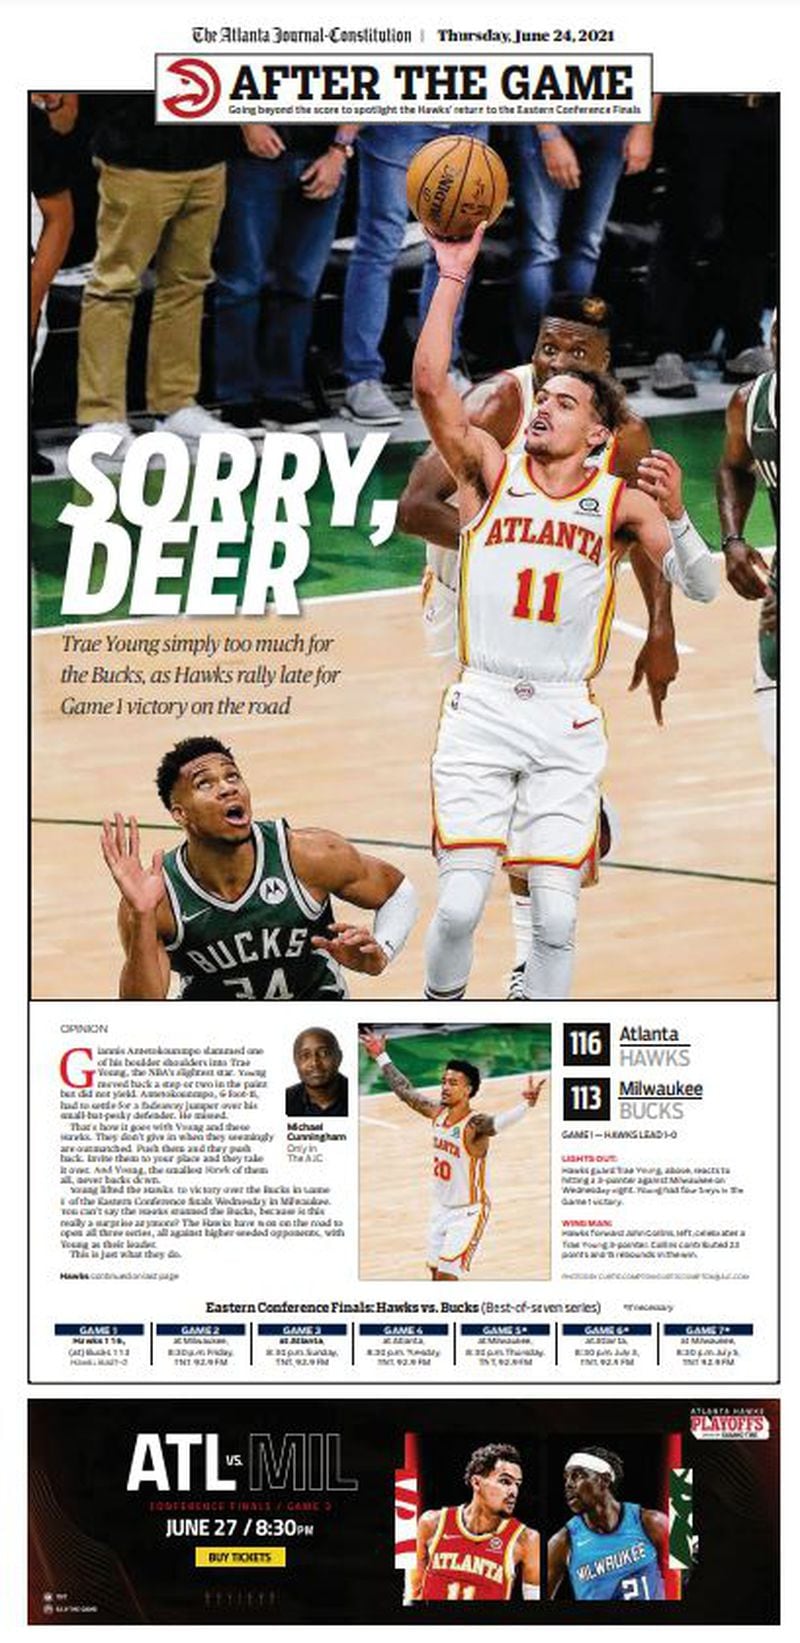 The Atlanta Journal-Constitution ePaper today includes supplemental coverage of the Hawks’ victory in Game 1 of the NBA Eastern Conference Finals against Milwaukee. The Hawks won